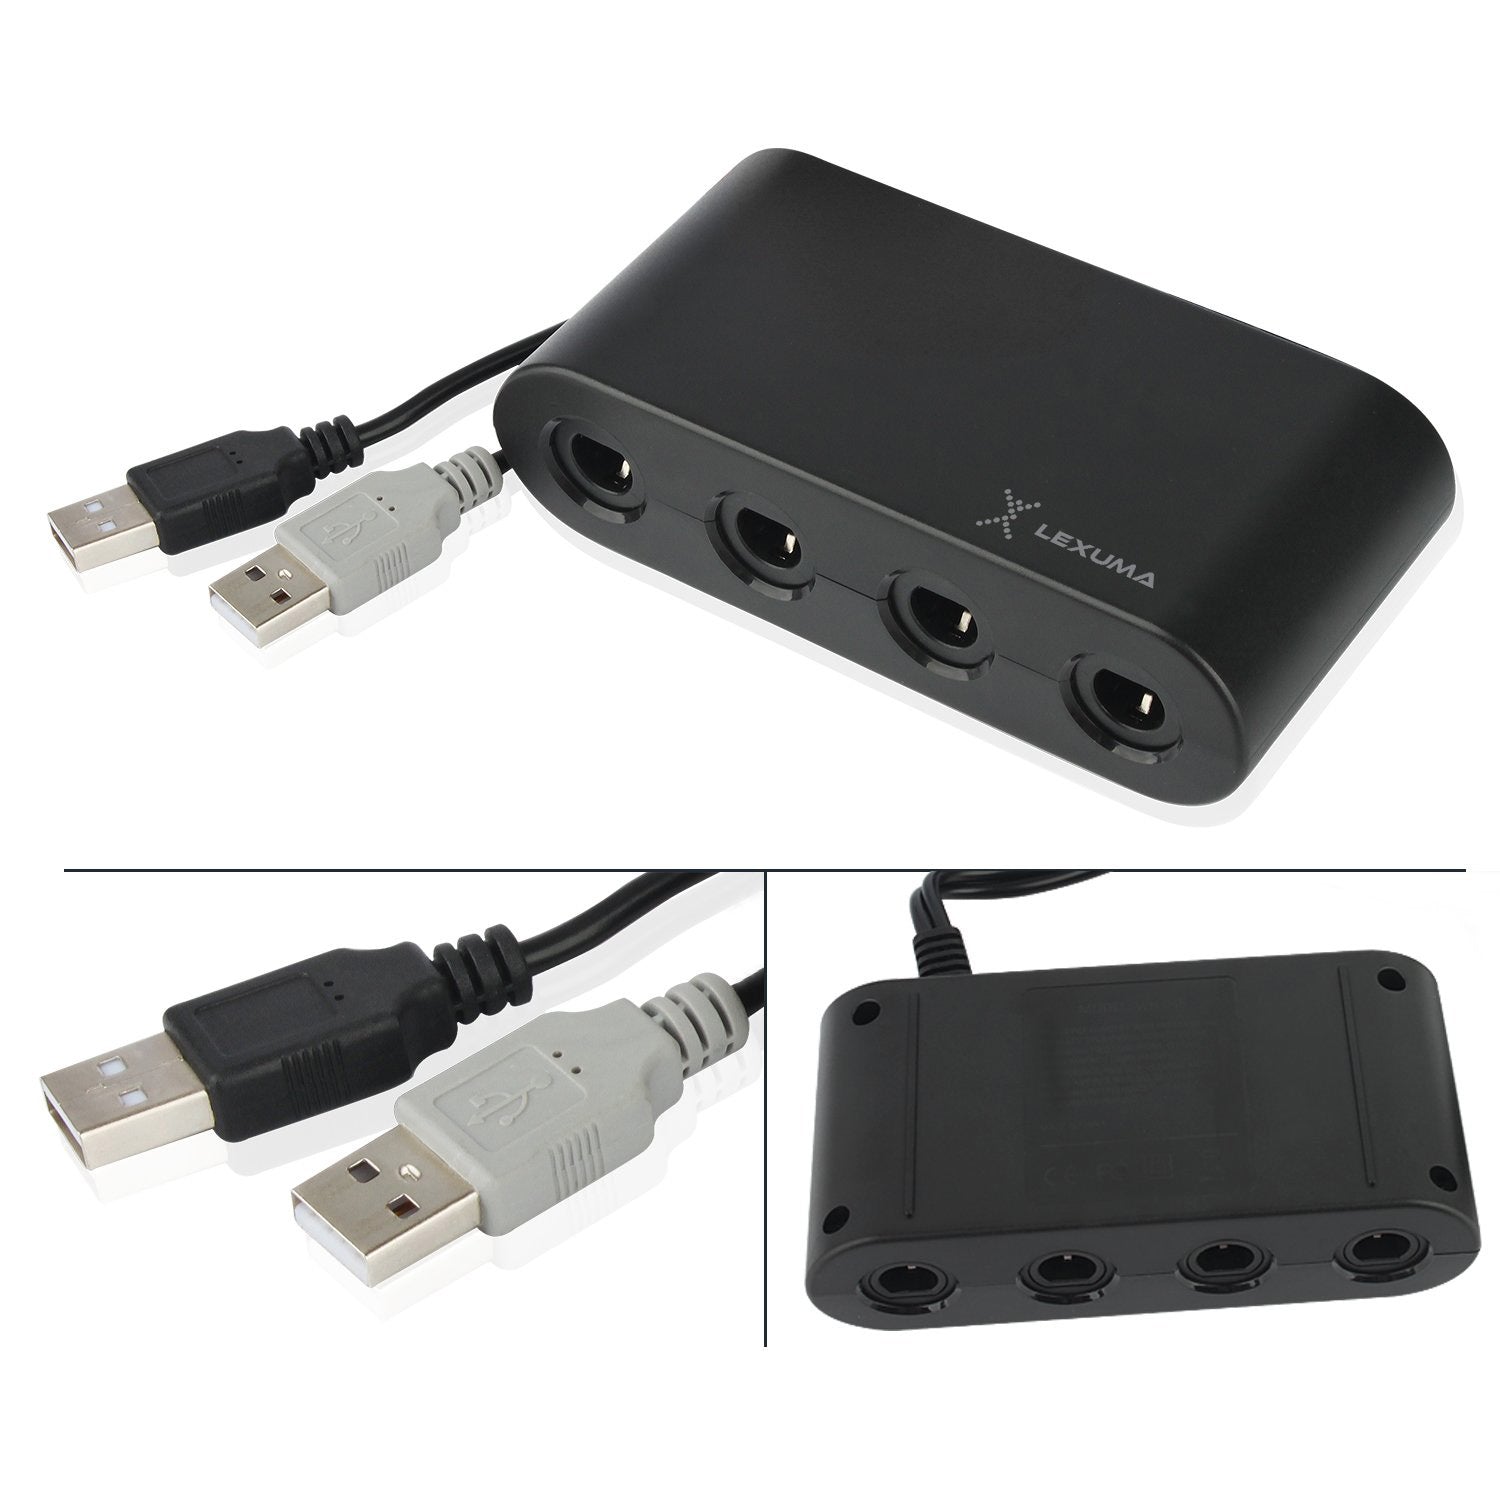 Gamecube Controller Adapter For Wii U Nintendo Switch And Pc Usb By L